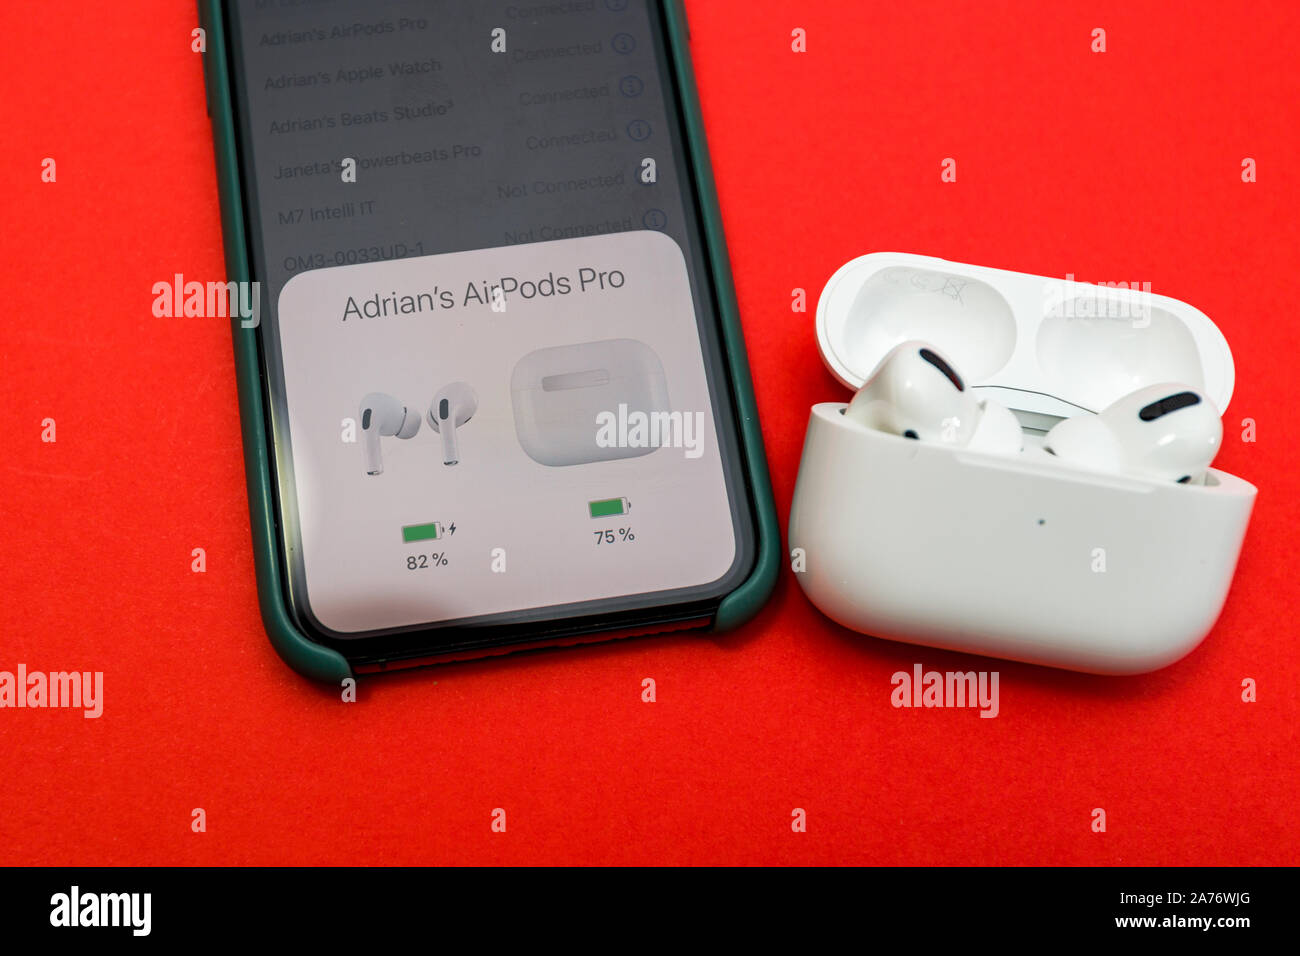 Paris, France - Oct 30, 2019: Connection to the iPhone 11 Pro smartphone of  new Apple Computers AirPods Pro headphones with Active Noise Cancellation  for immersive sound Stock Photo - Alamy